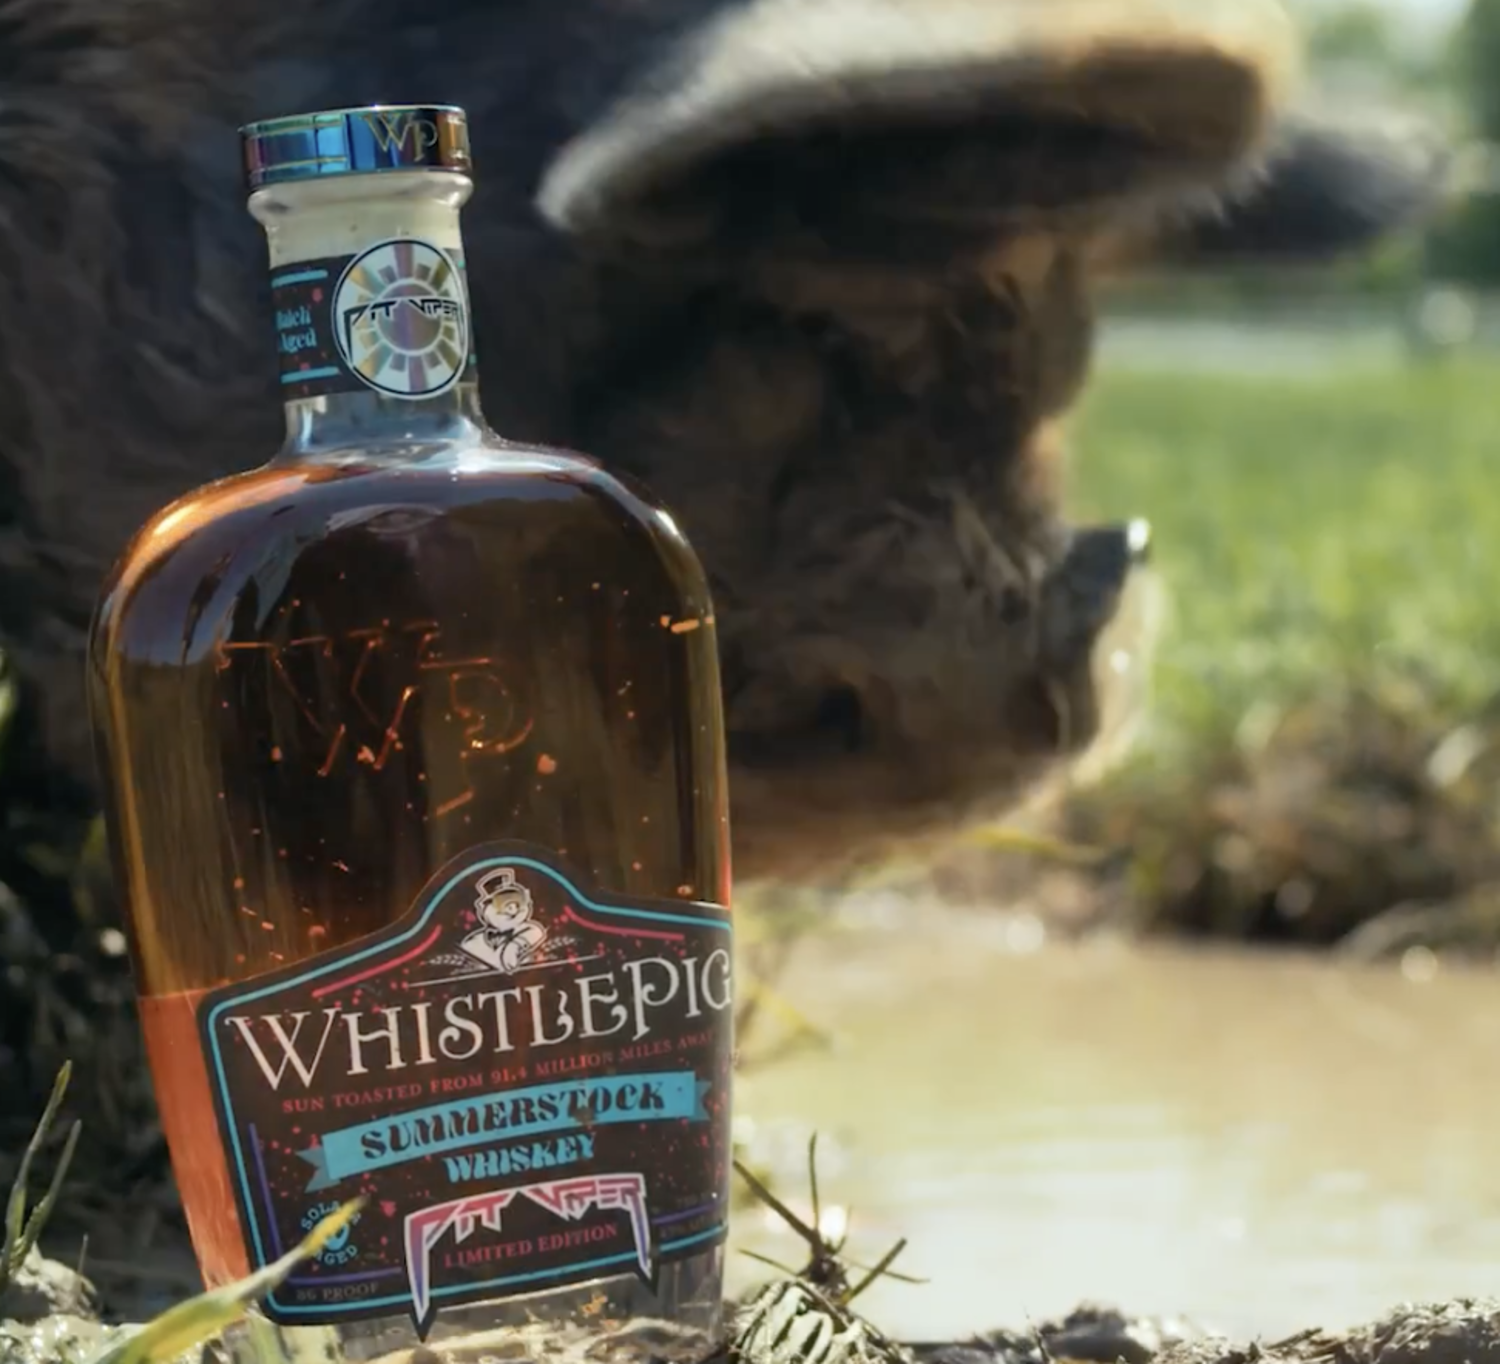 Whiskey, Pit Viper Summerstock Whistlepig, 750mL - Michael's